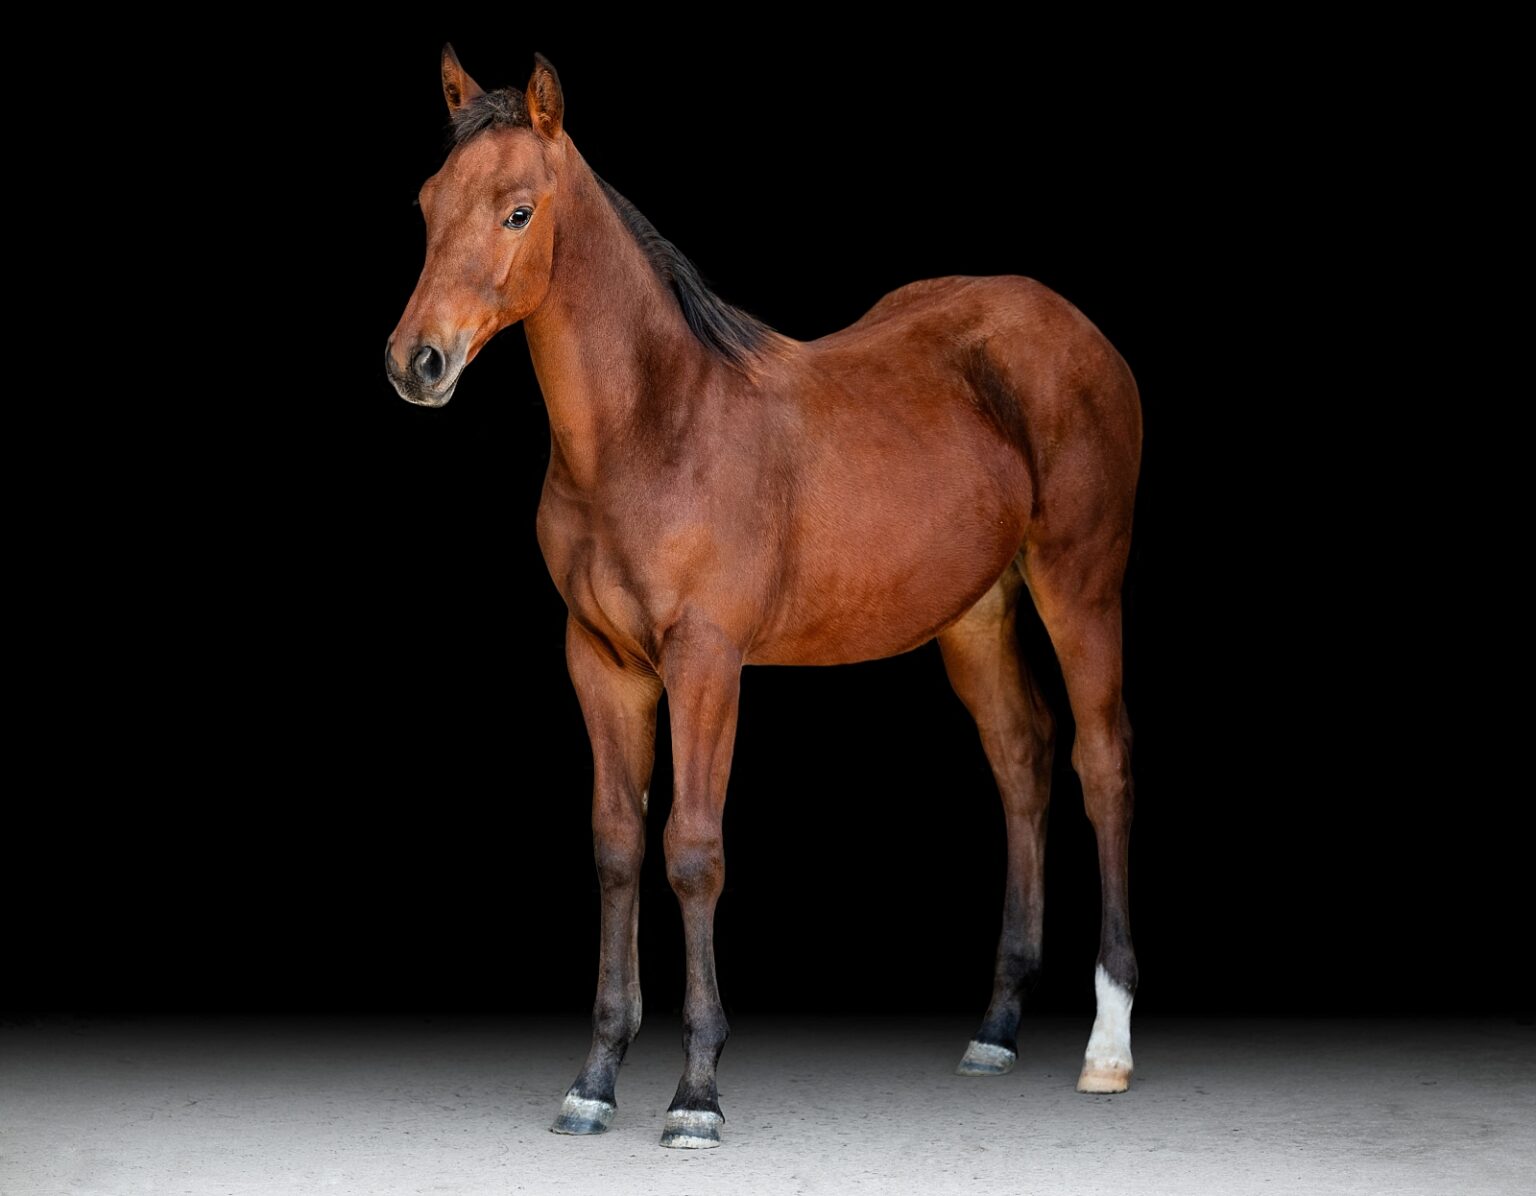 AQHA Photographer takes photos of foals against a black background. Fine art foal photography.